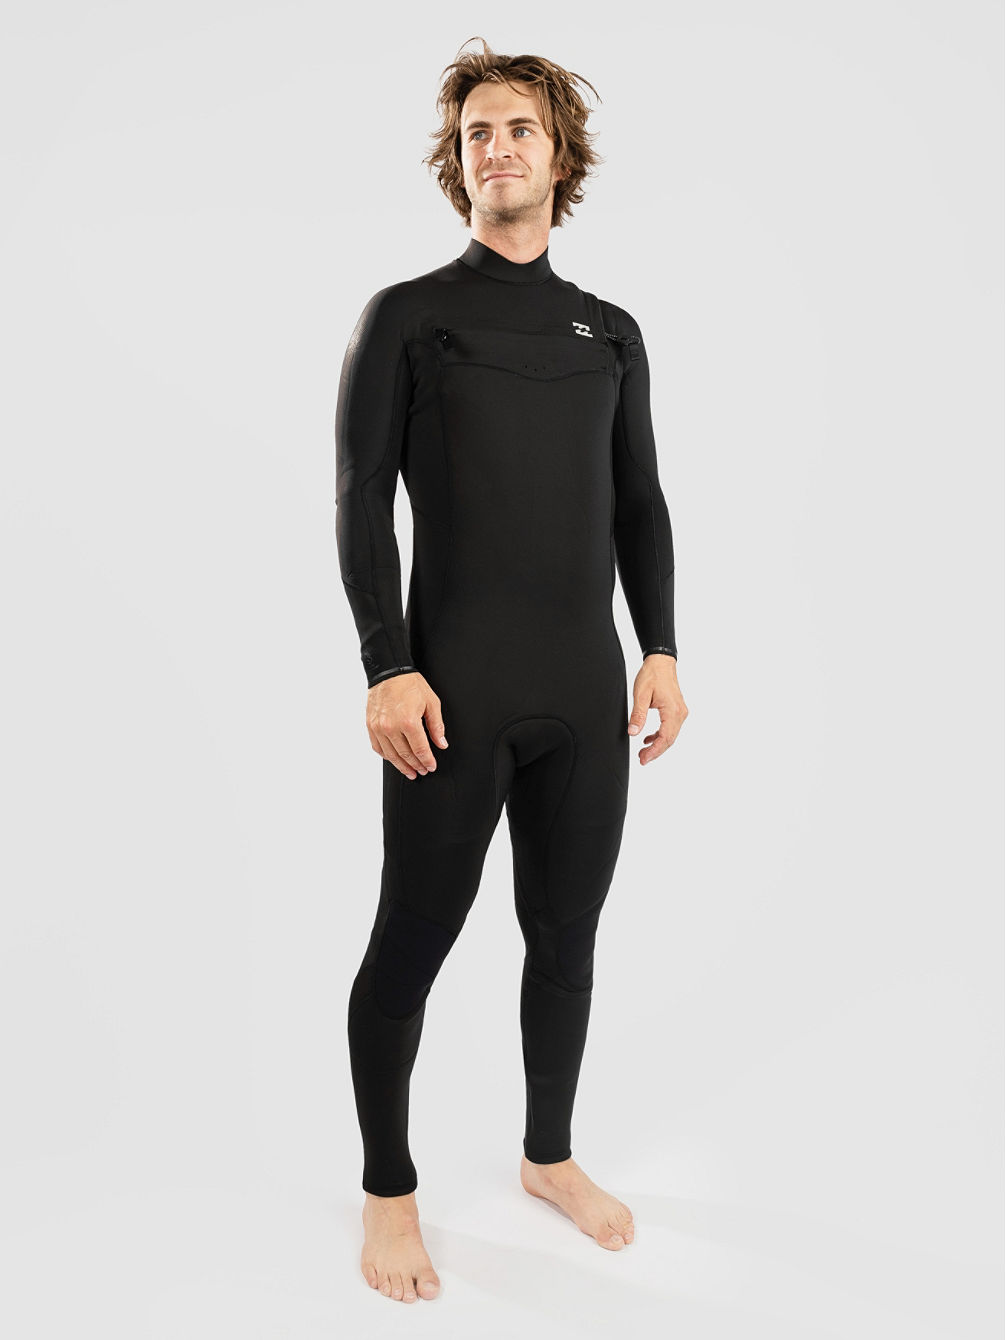 Absolute 3/2 Chest Zip Wetsuit